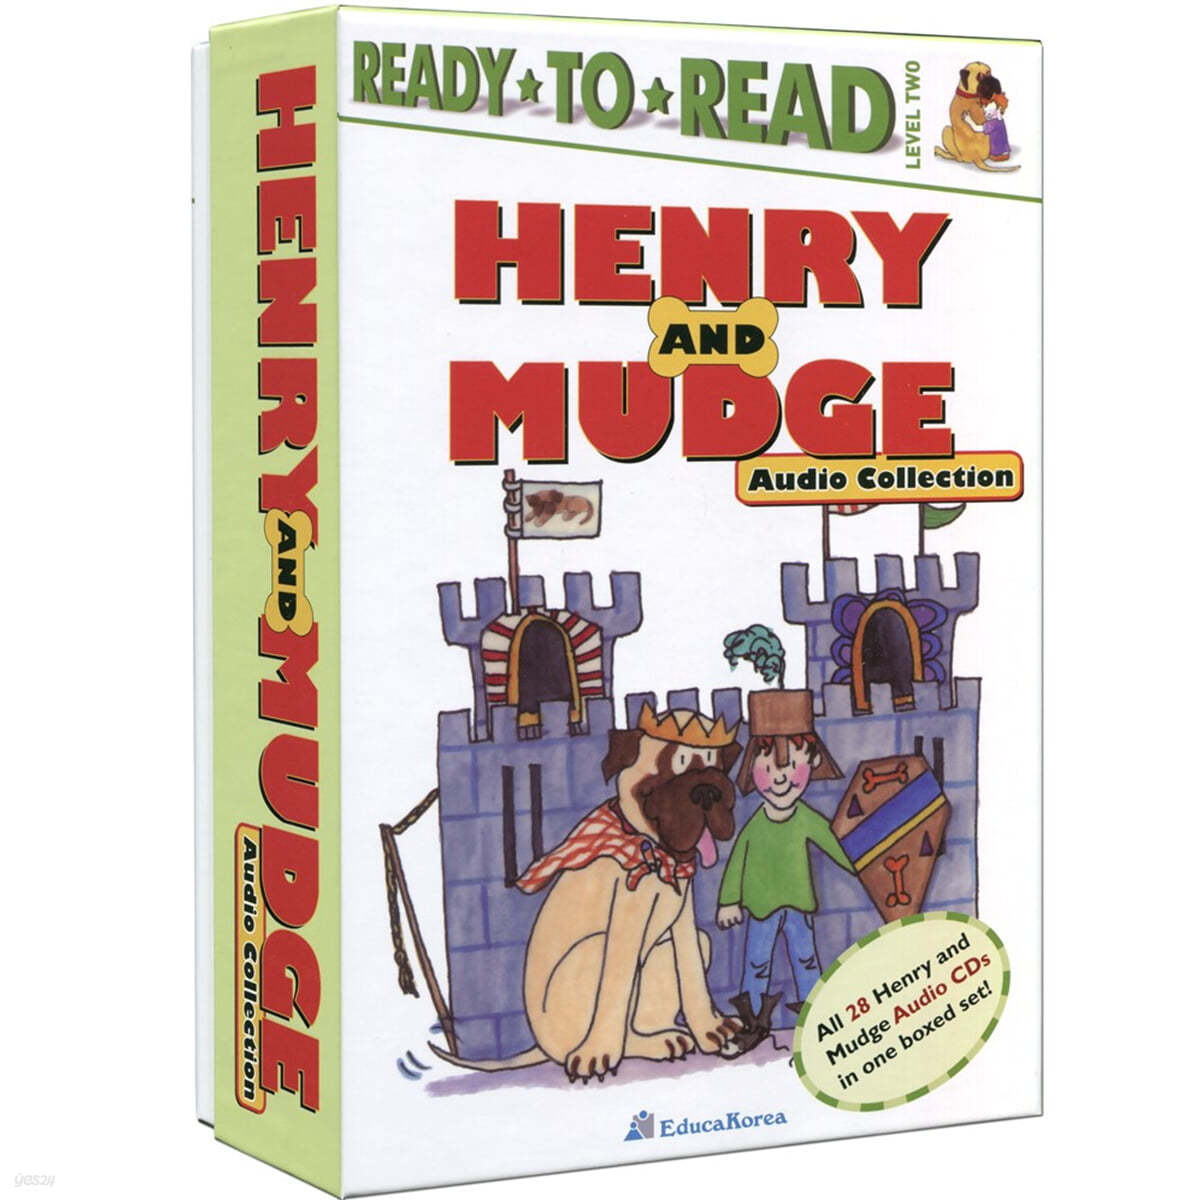 Ready-To-Read Level 2 : Henry and Mudge 시리즈 28종 Audio CD 박스 세트